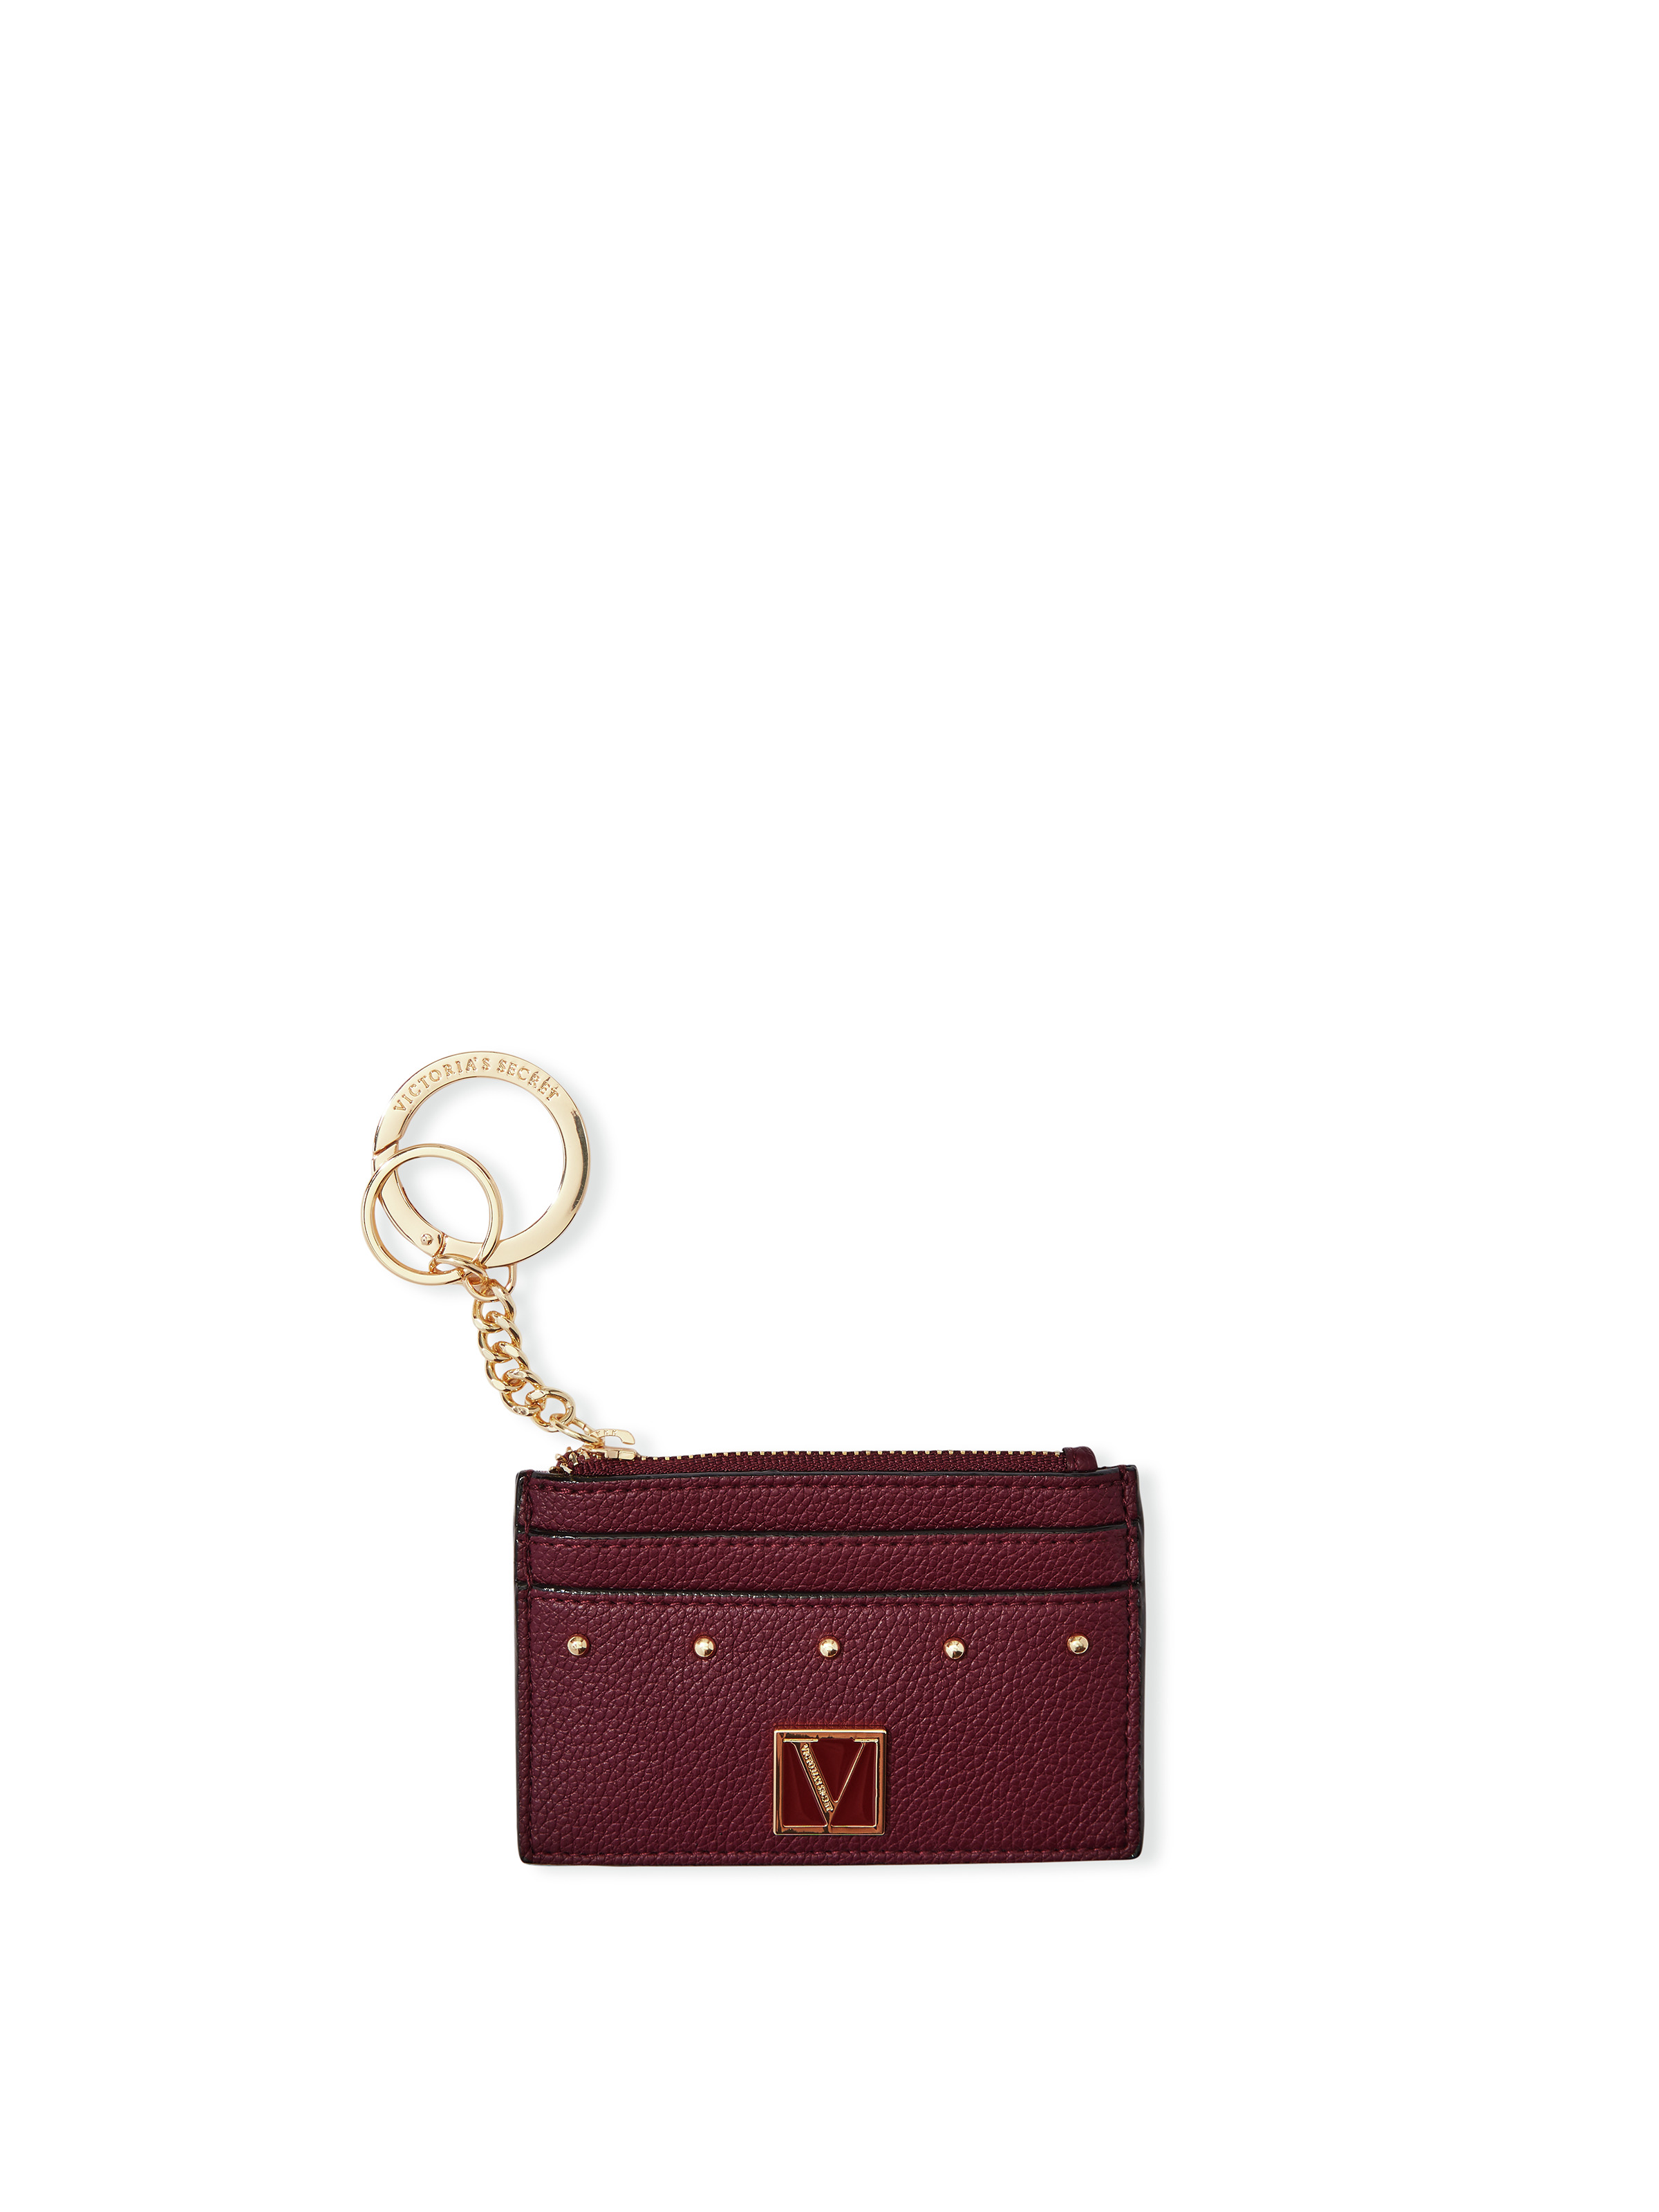 Buy The Victoria Card Case Keychain